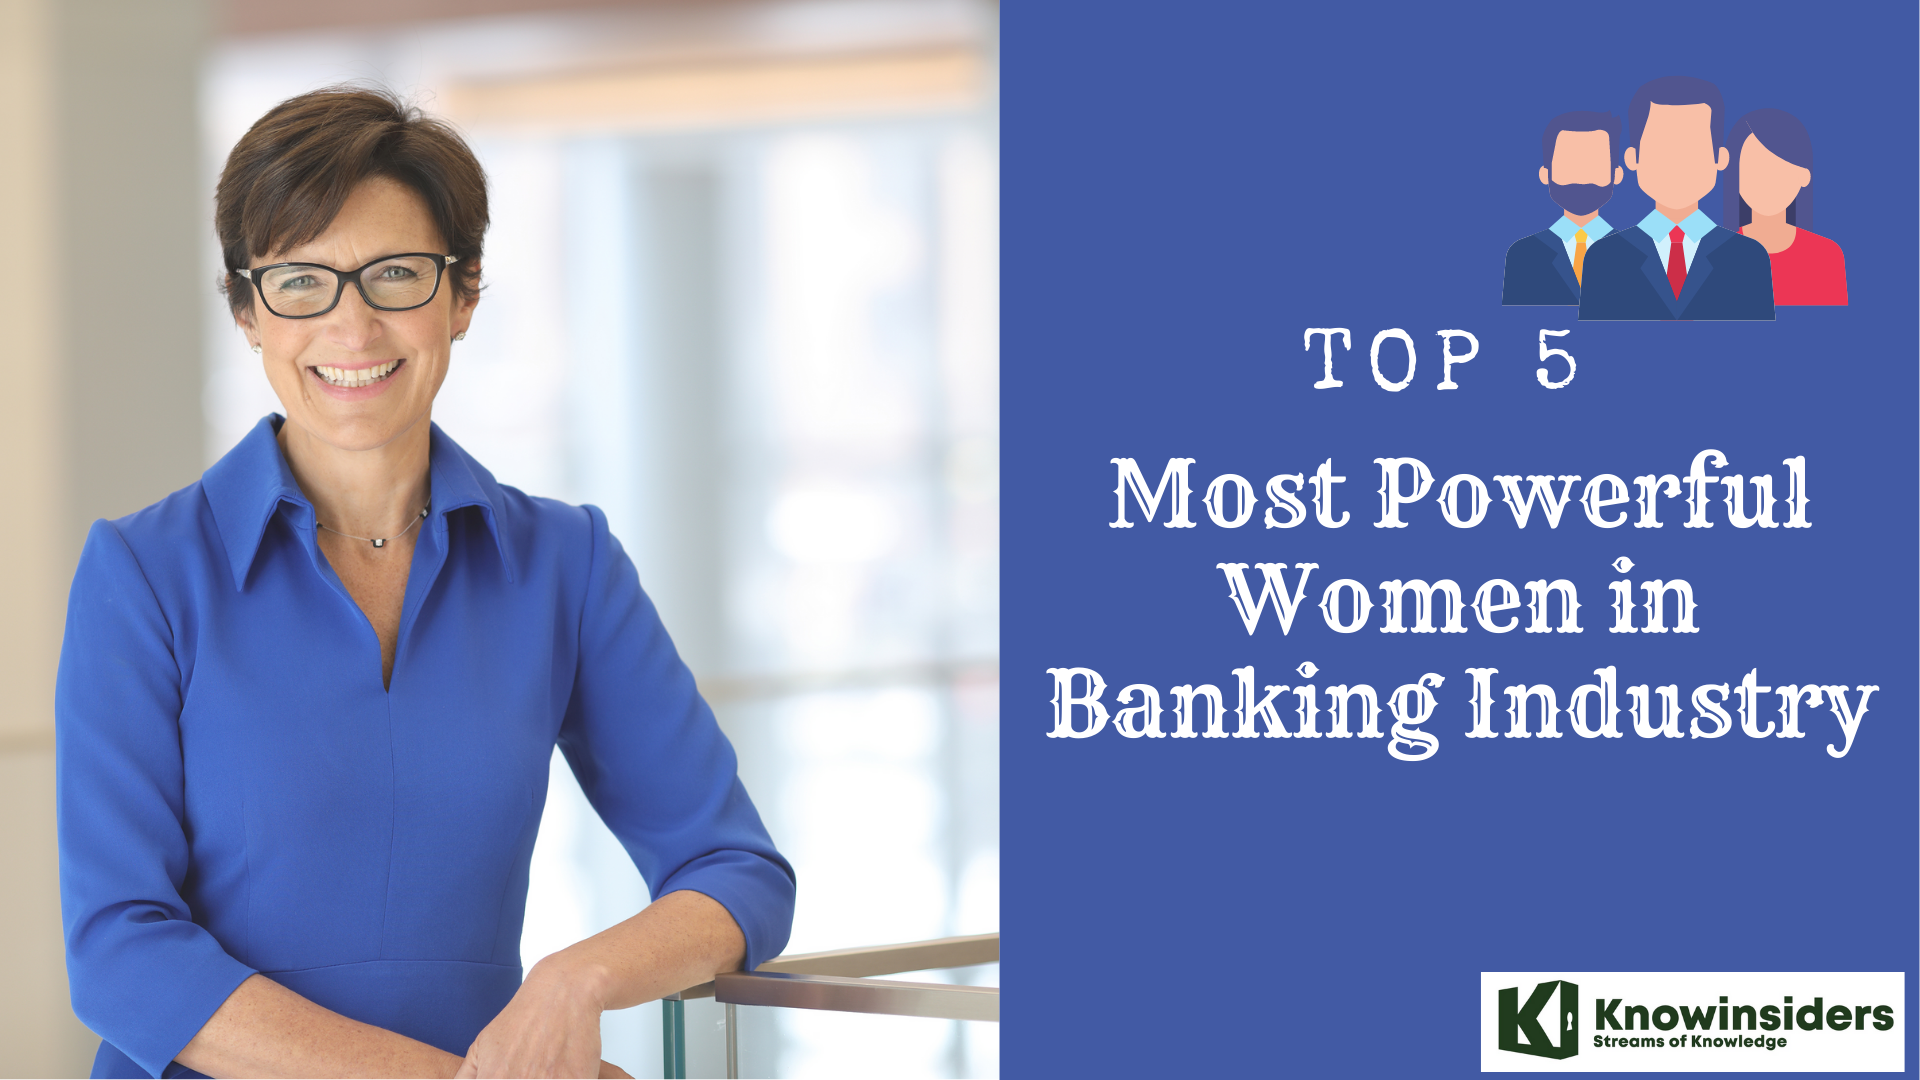 Top 5 Most Powerful Women in Banking of the World